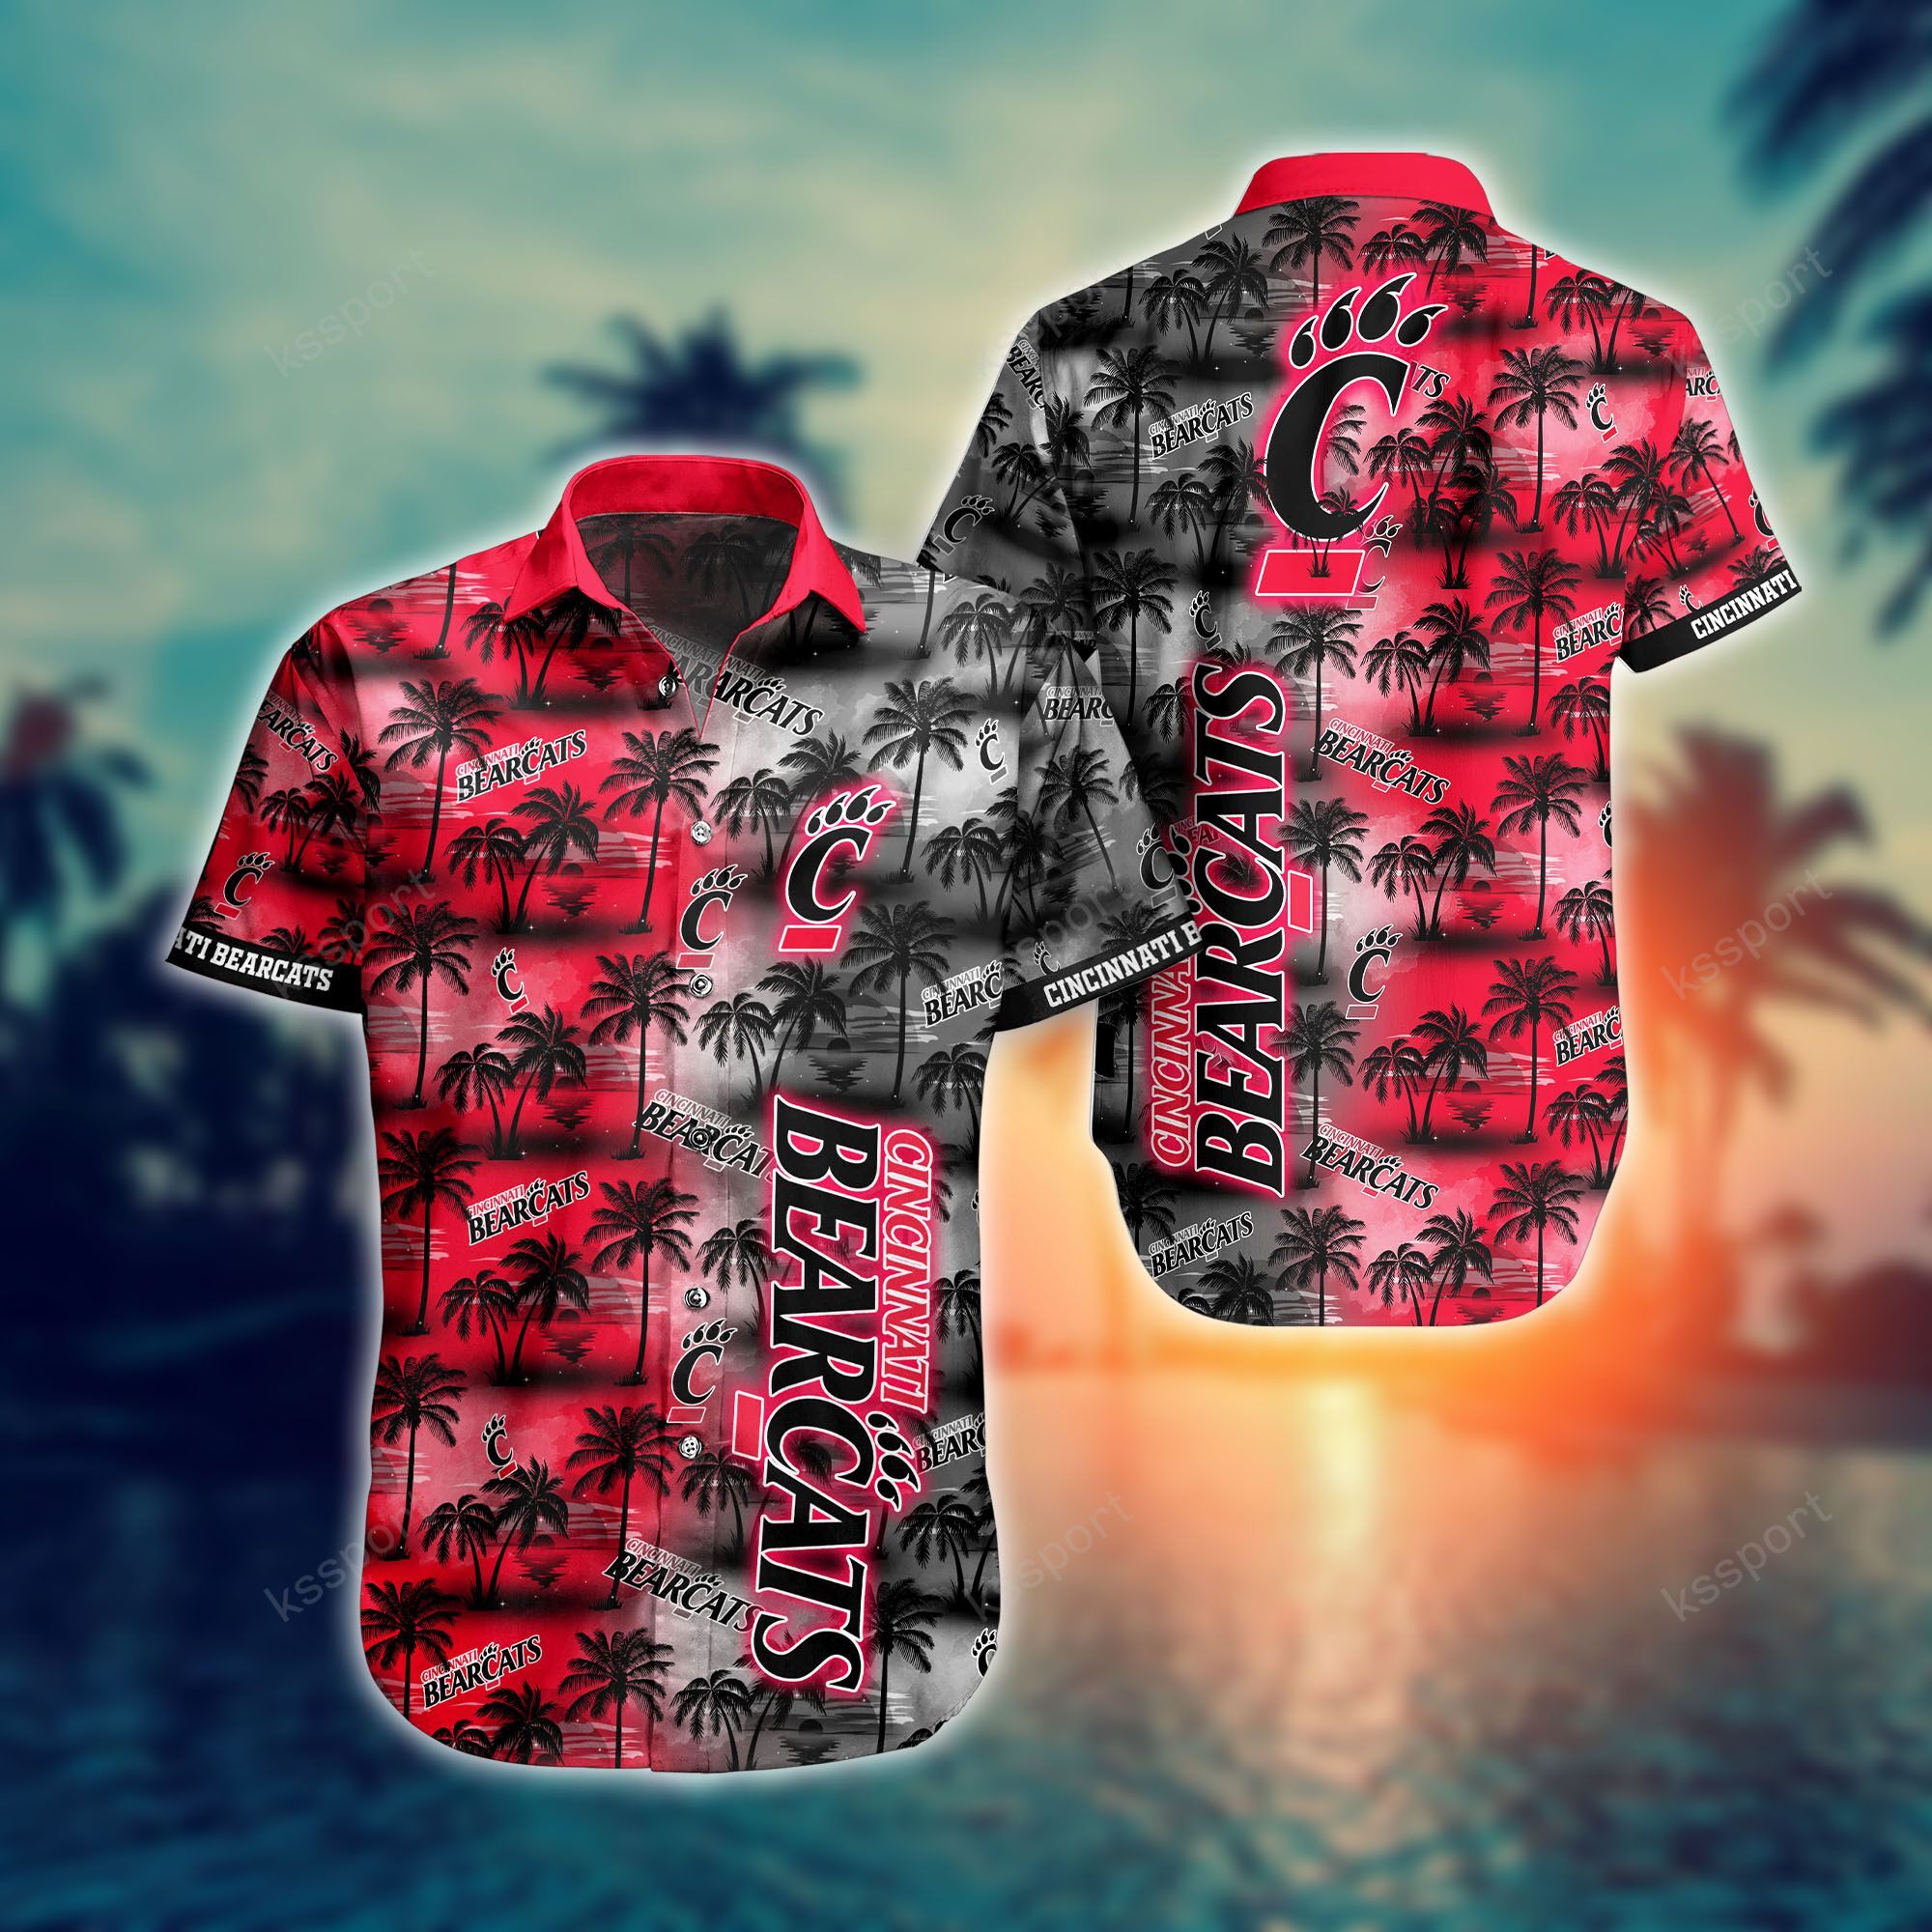 Treat yourself to a cool Hawaiian set today! 15